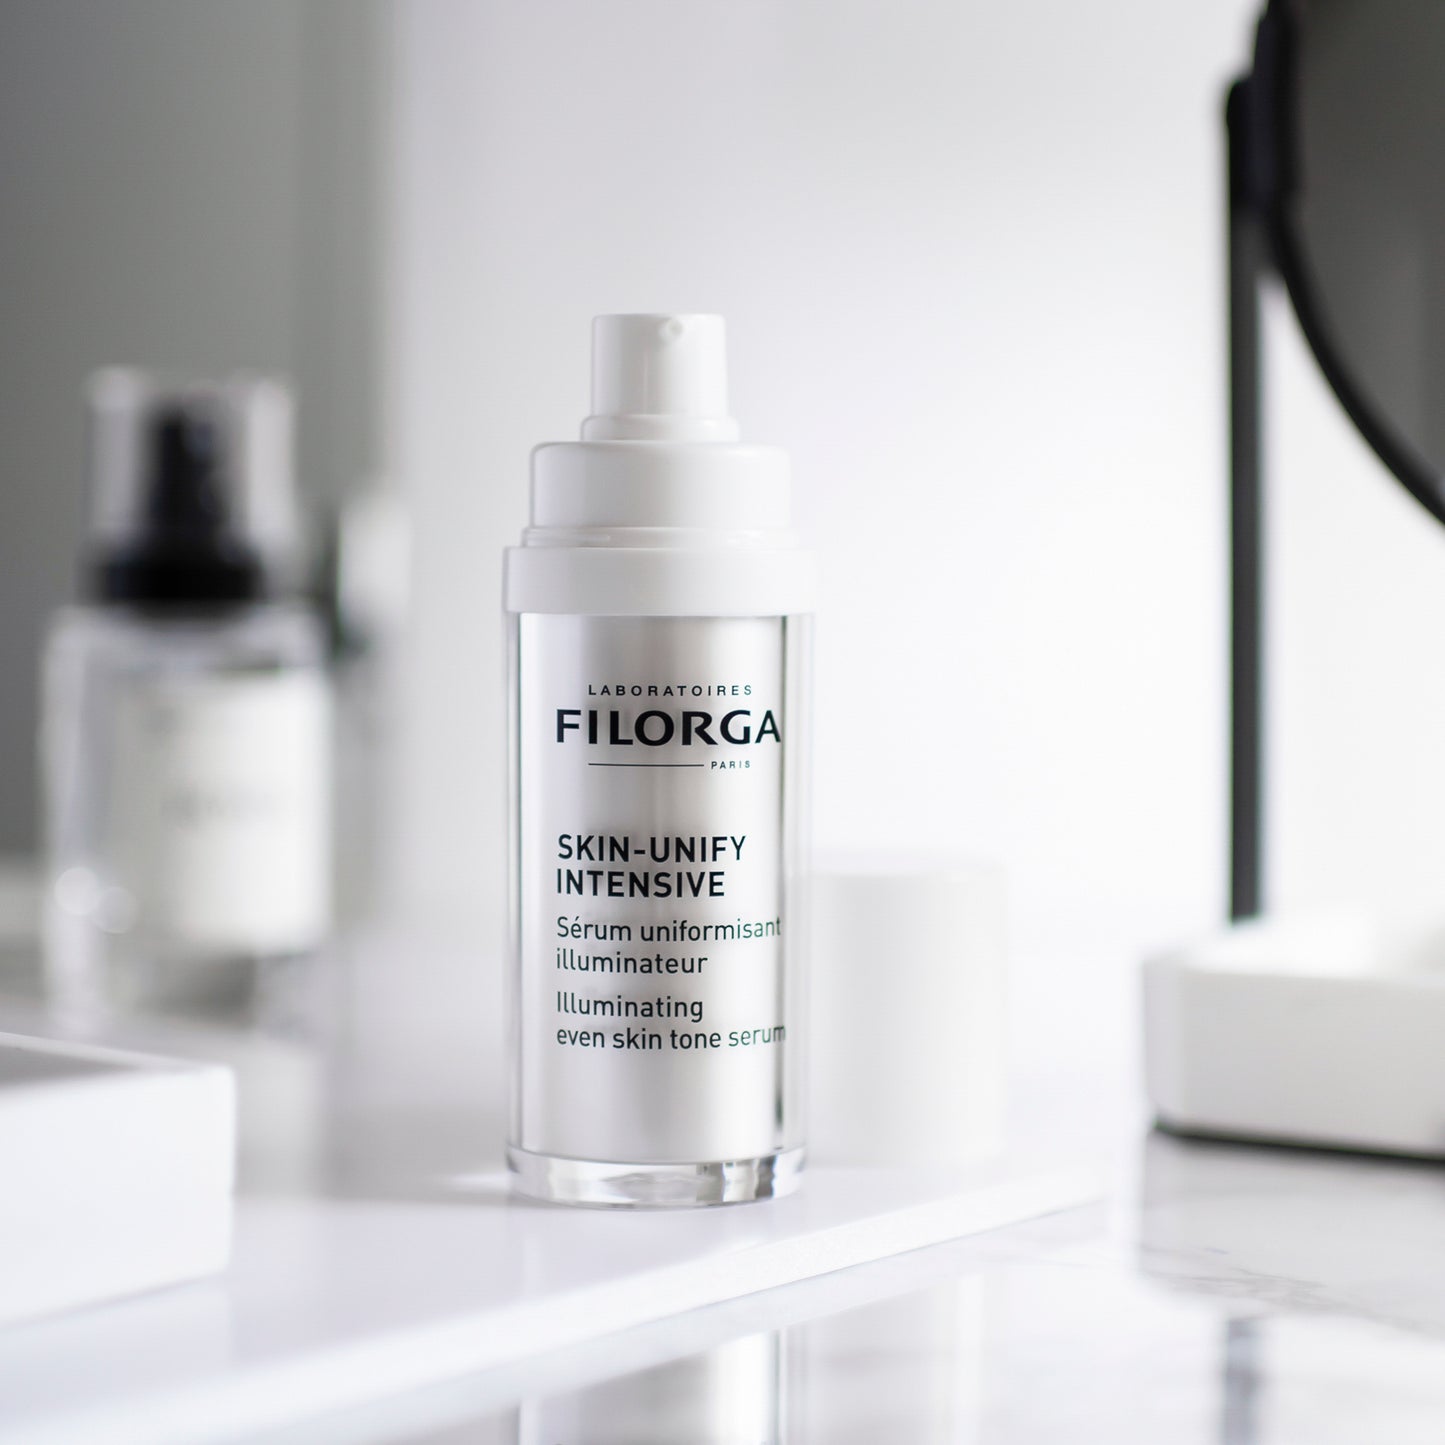 FILORGA SKIN-UNIFY INTENSIVE open bottle on a white marble vanity with a mirror